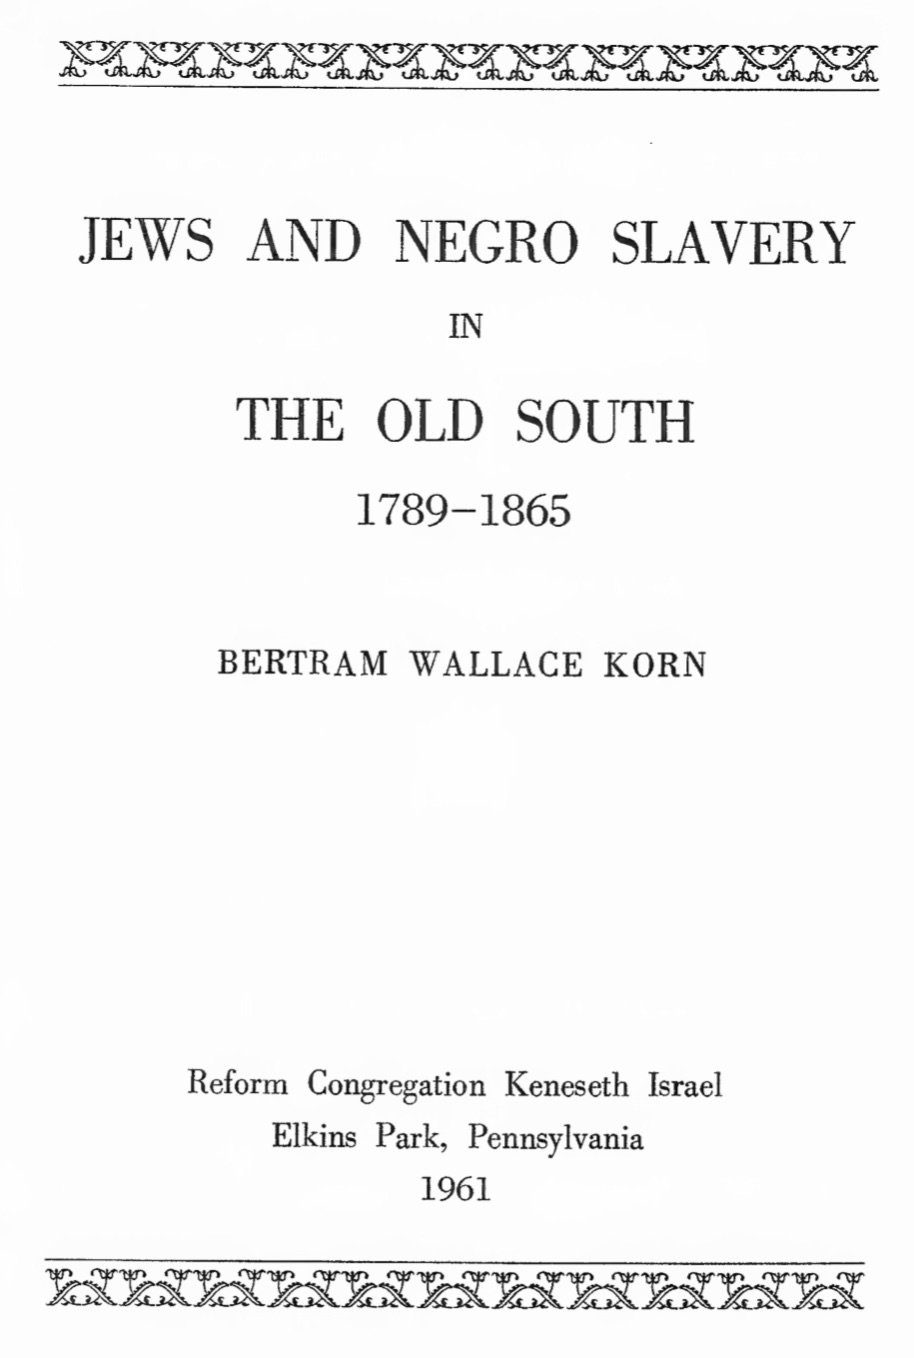 Jews and Negro Slavery in The Old South - 1789-1865 (1961) by Bertram Wallace Korn